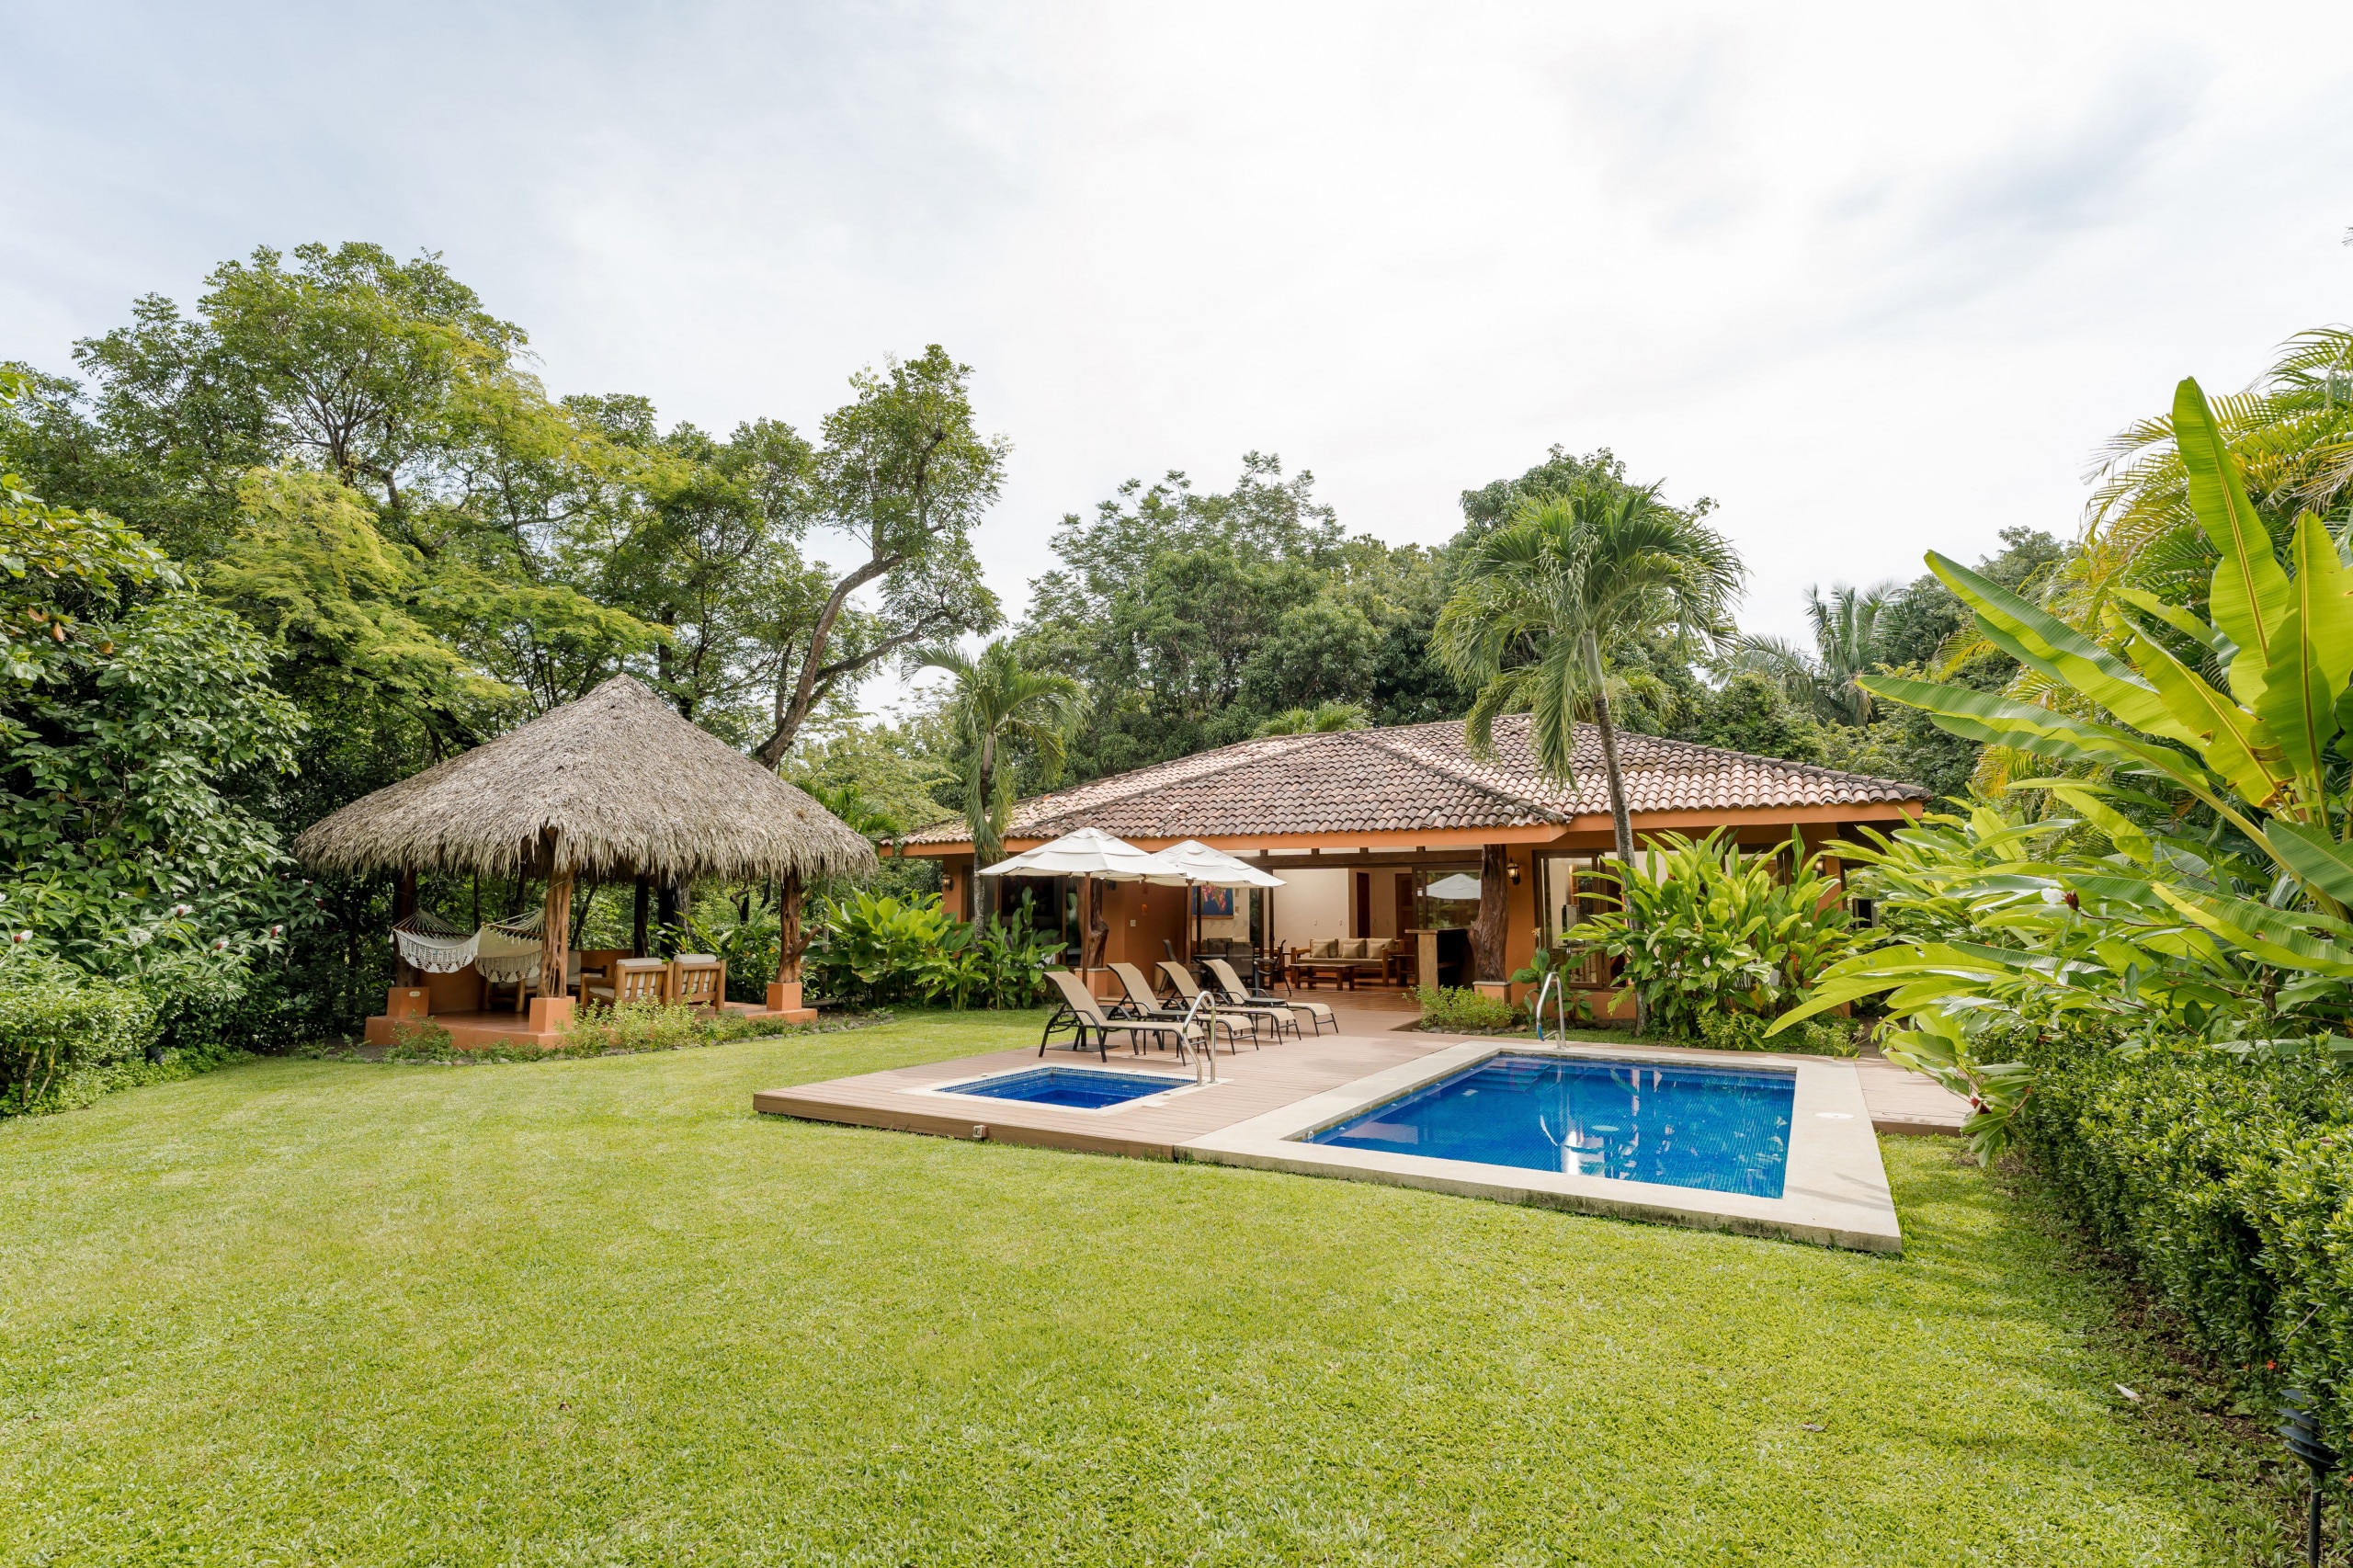 Property Image 1 - Beach Forest, charming, private, and rustic-style 3 bedroom villa in the middle of nature